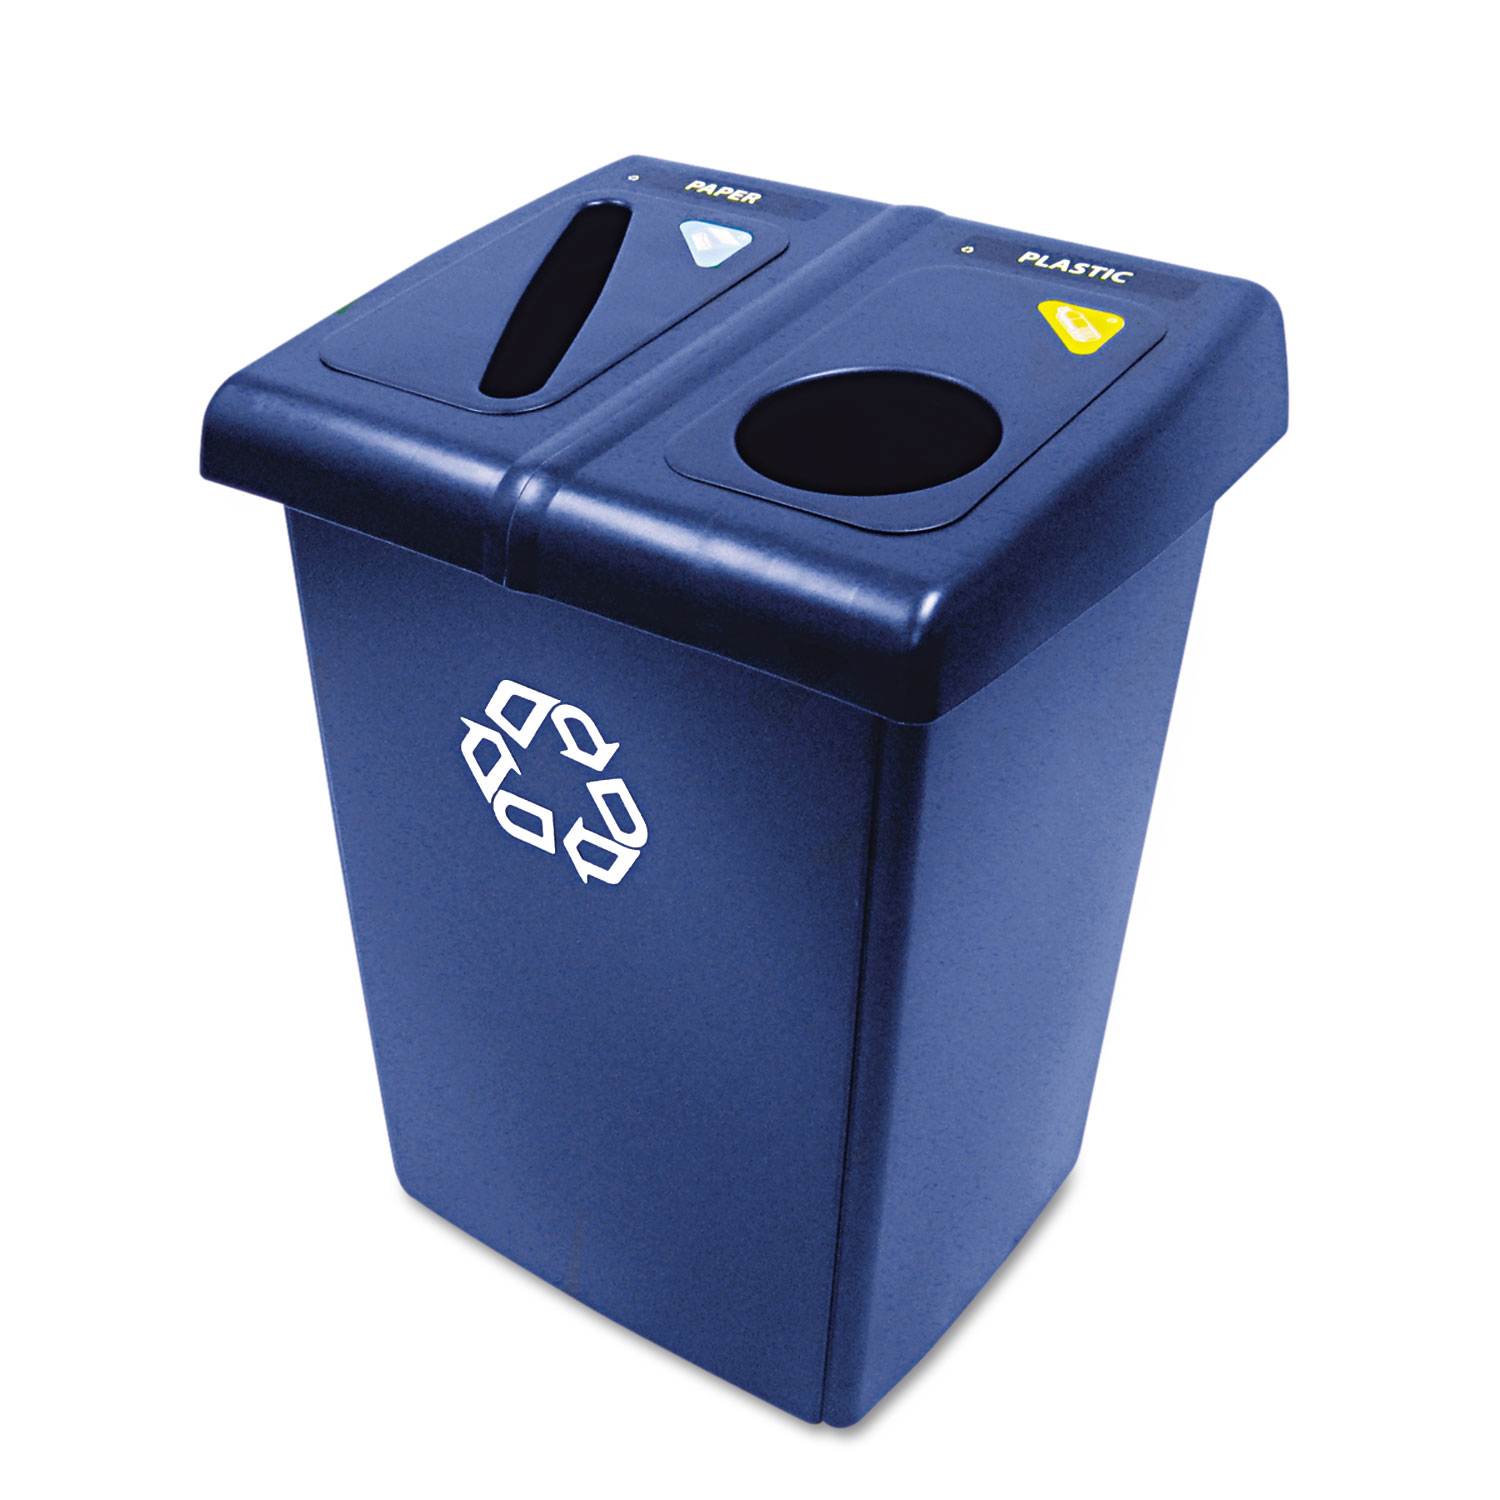  Rubbermaid Commercial 1792339 Glutton Recycling Station, Two-Stream, 46 gal, Blue (RCP1792339) 